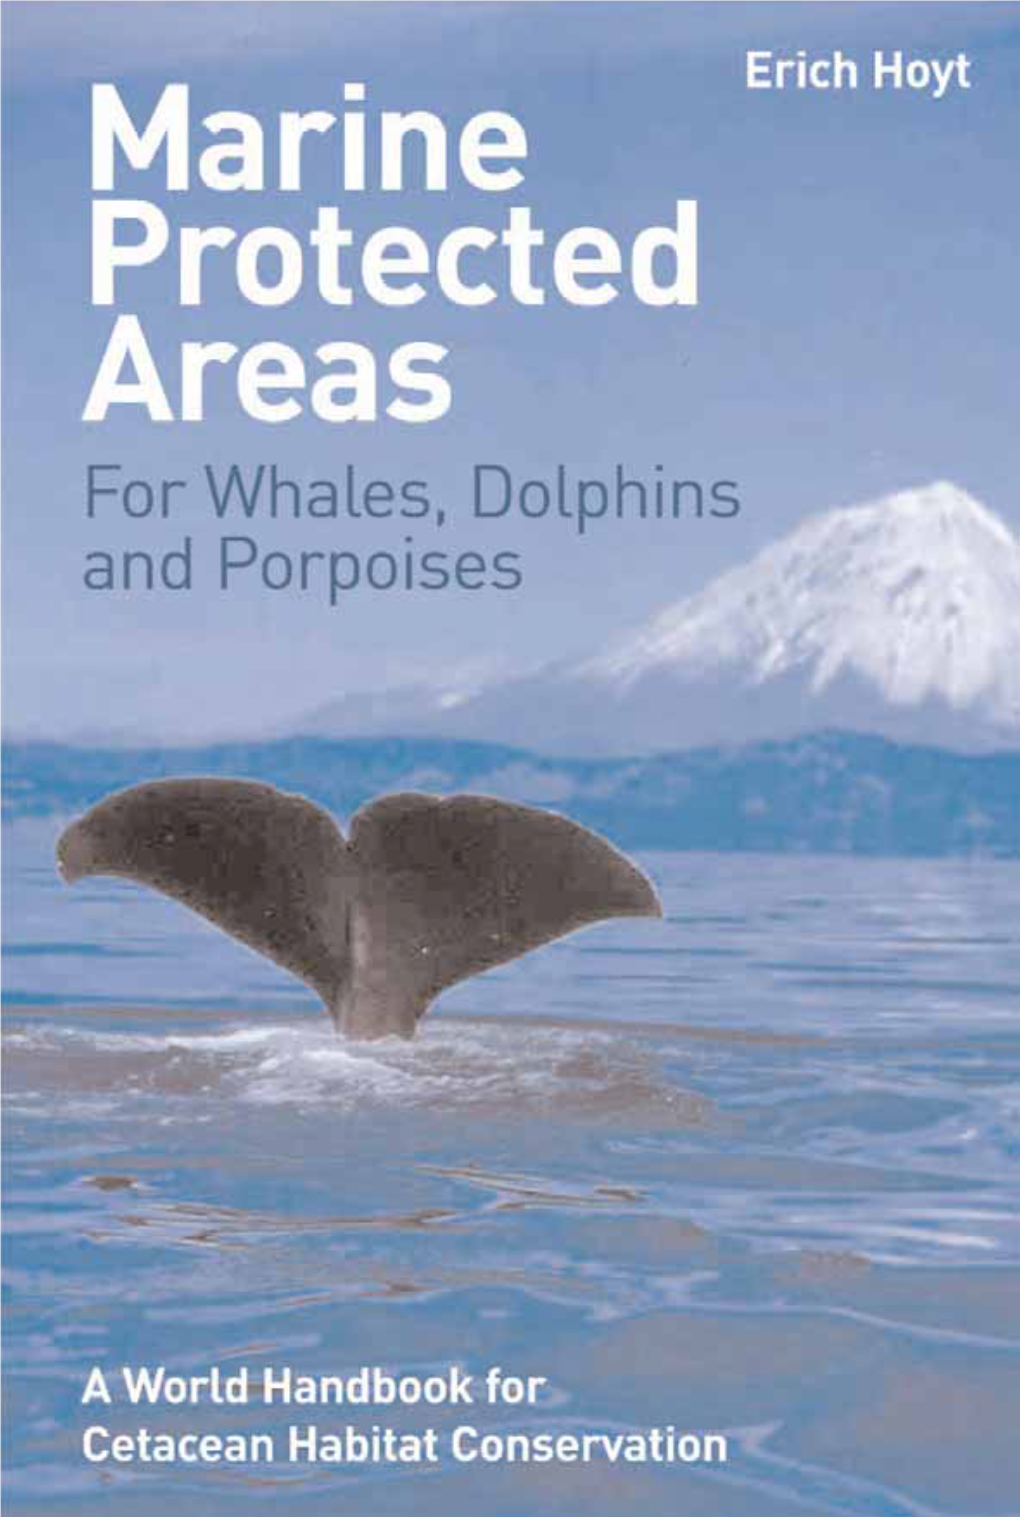 Marine Protected Areas for Whales, Dolphins, and Porpoises : a World Handbook for Cetacean Habitat Conservation / by Erich Hoyt